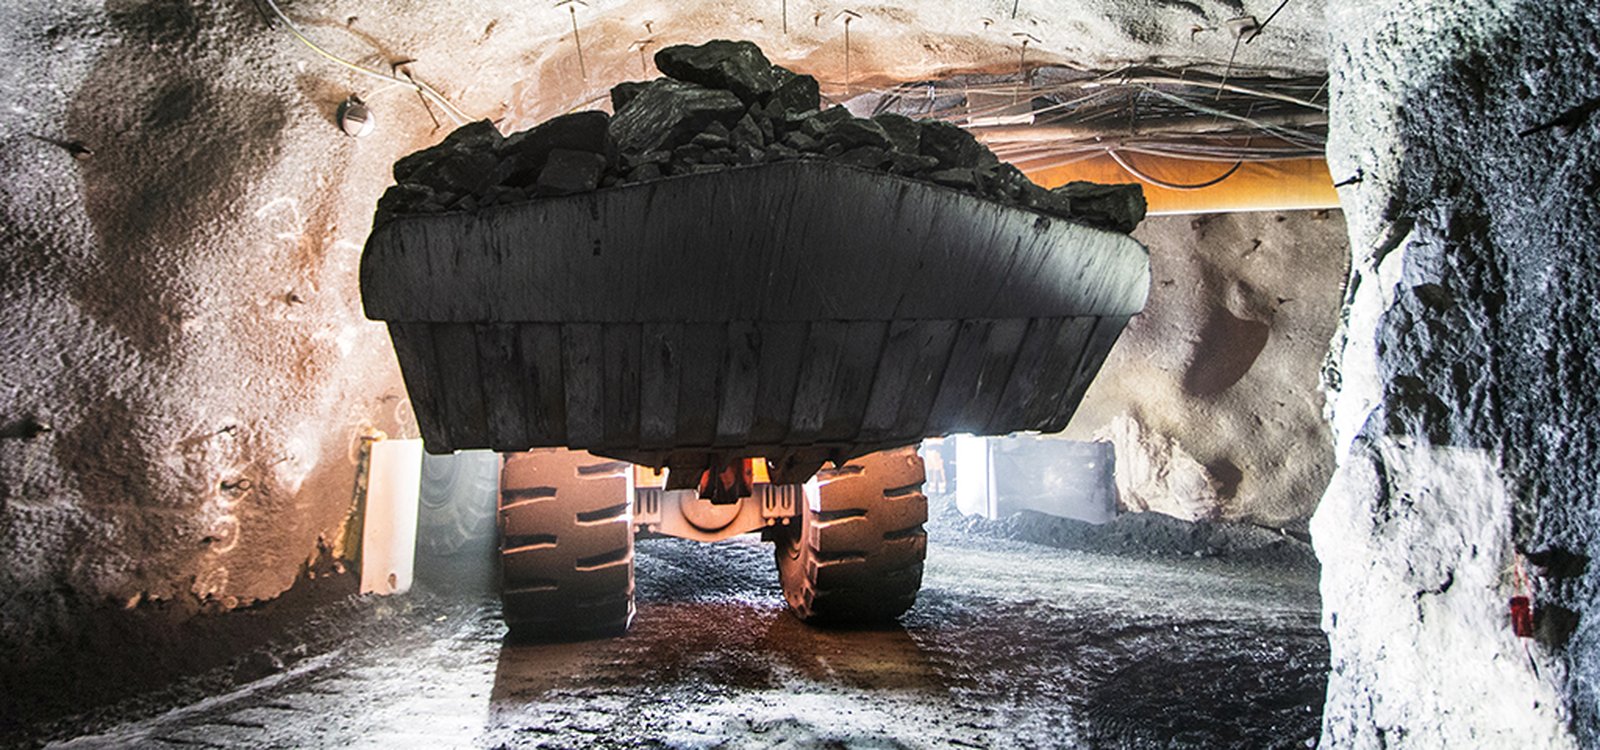 <p>LKAB mines 80 percent of all of the iron ore in Europe. In 2020 it produced 27.1 million tonnes of iron ore products.</p>
